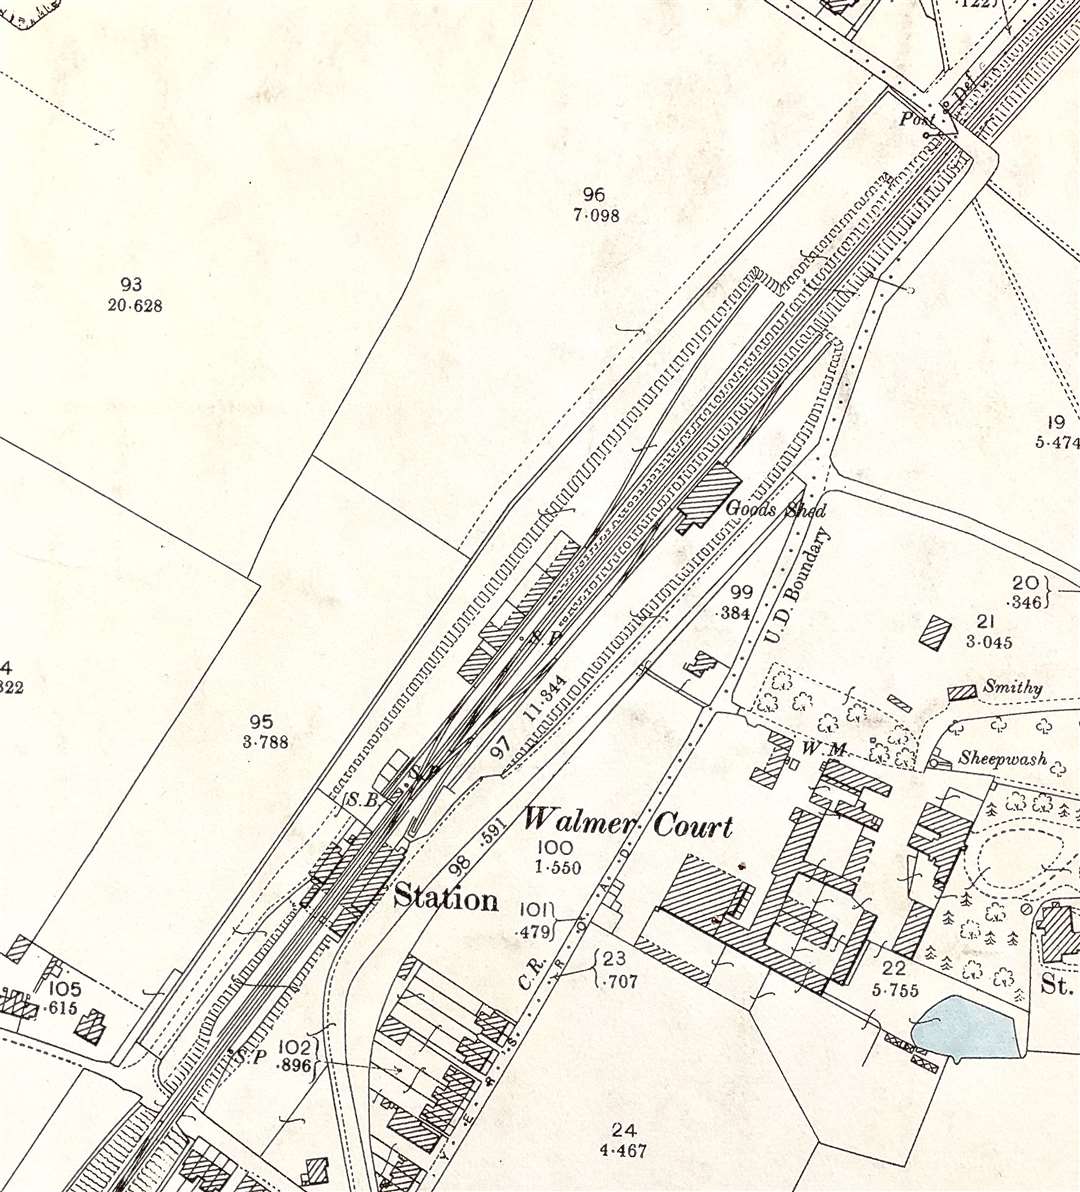 A map of Walmer shows the Good Shed at the village station which is where the tragedy happened